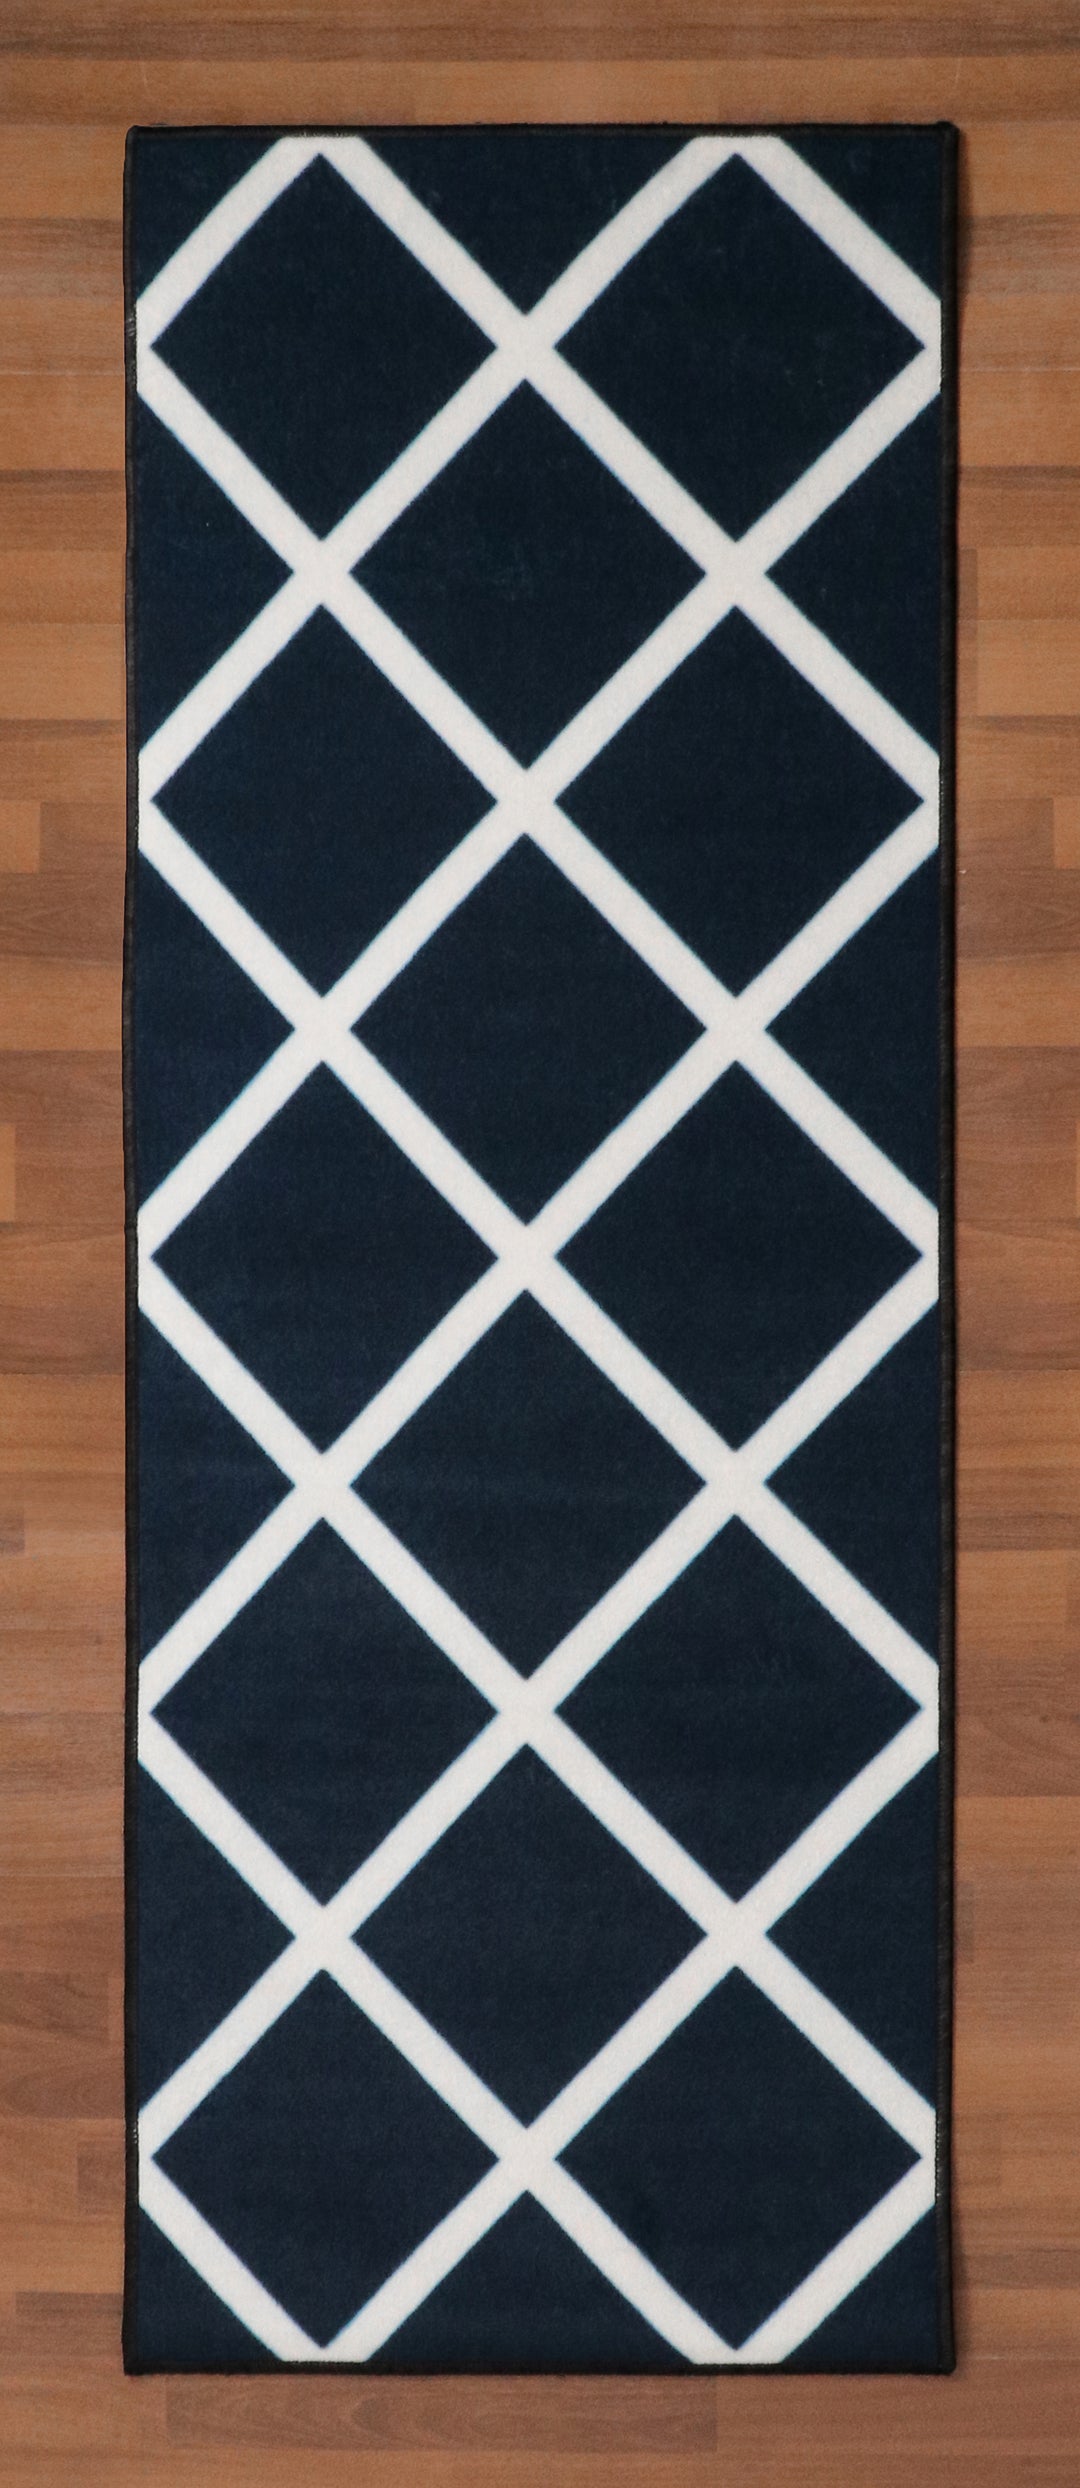 Blue With Beige Color Criss Cross Print Runner